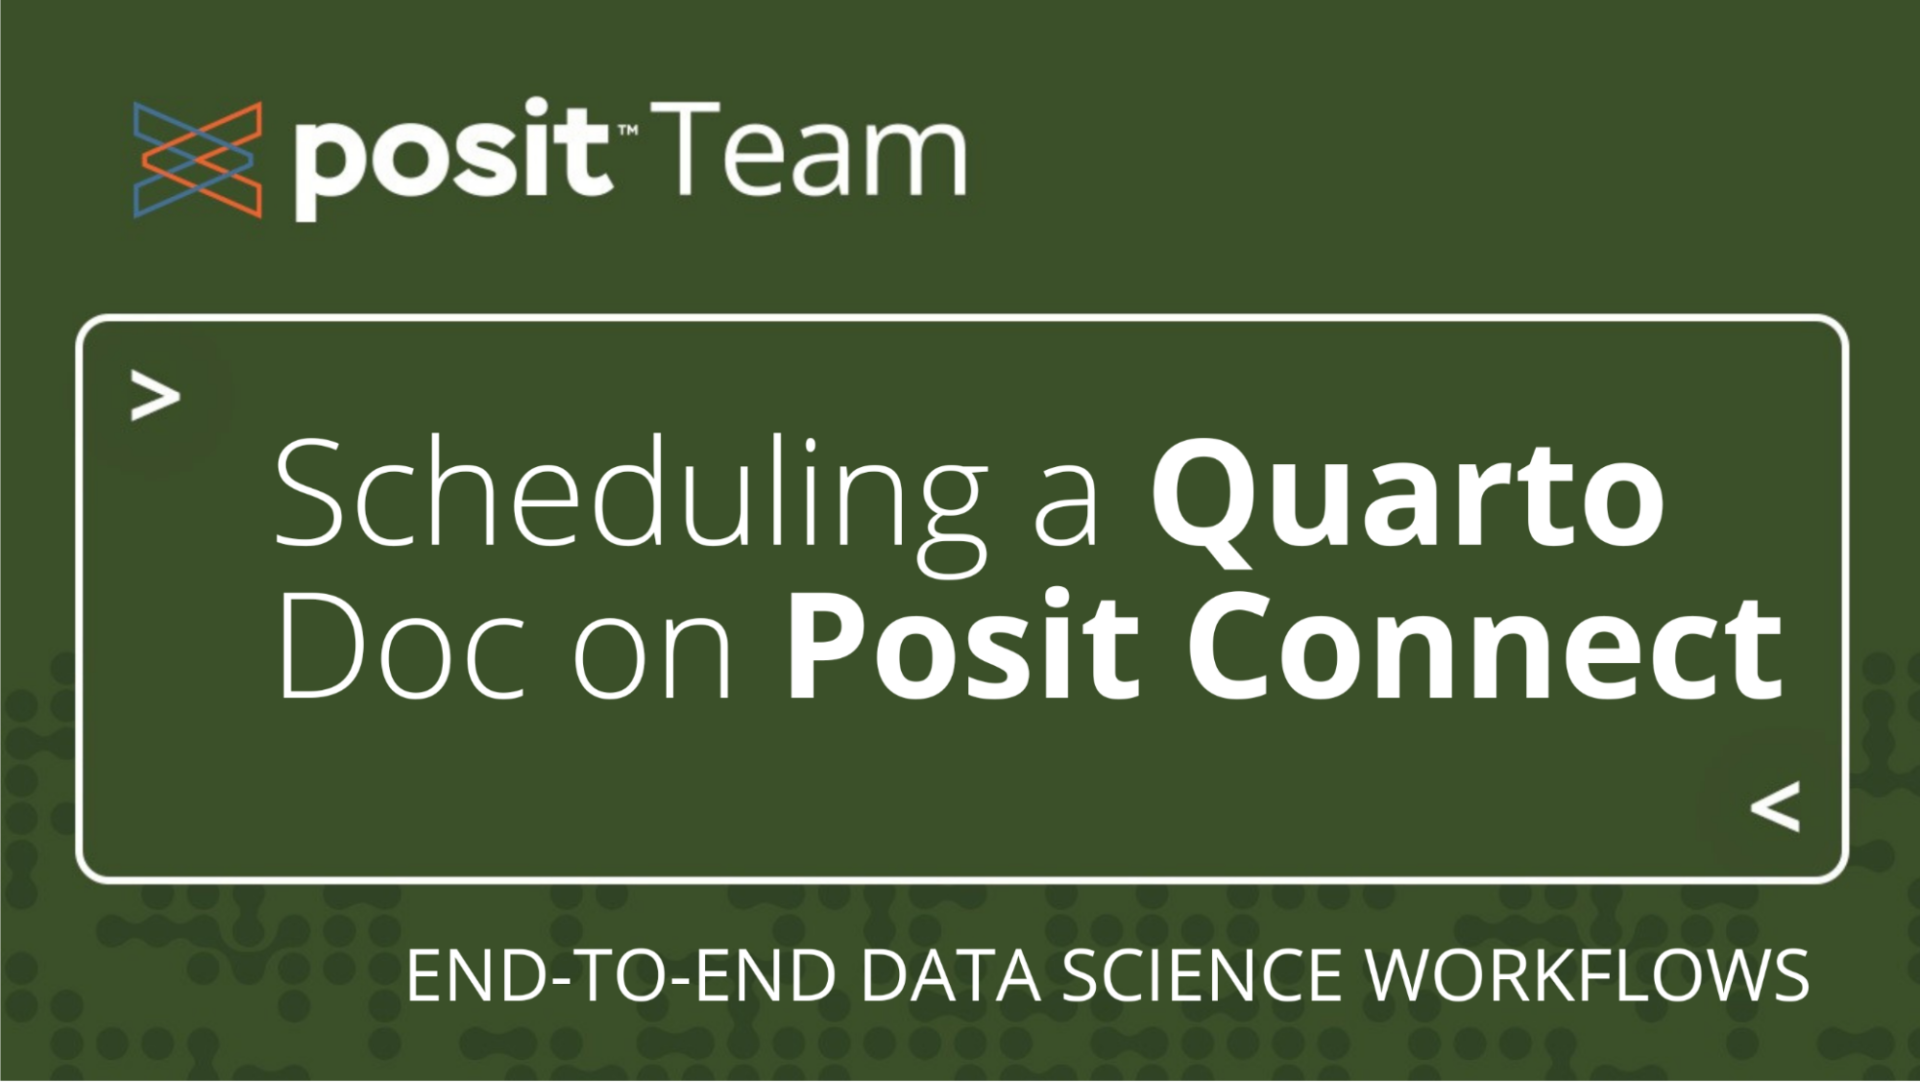 Posit Team: Scheduling a Quarto Doc on Posit Connect. End-to-end data science workflows.